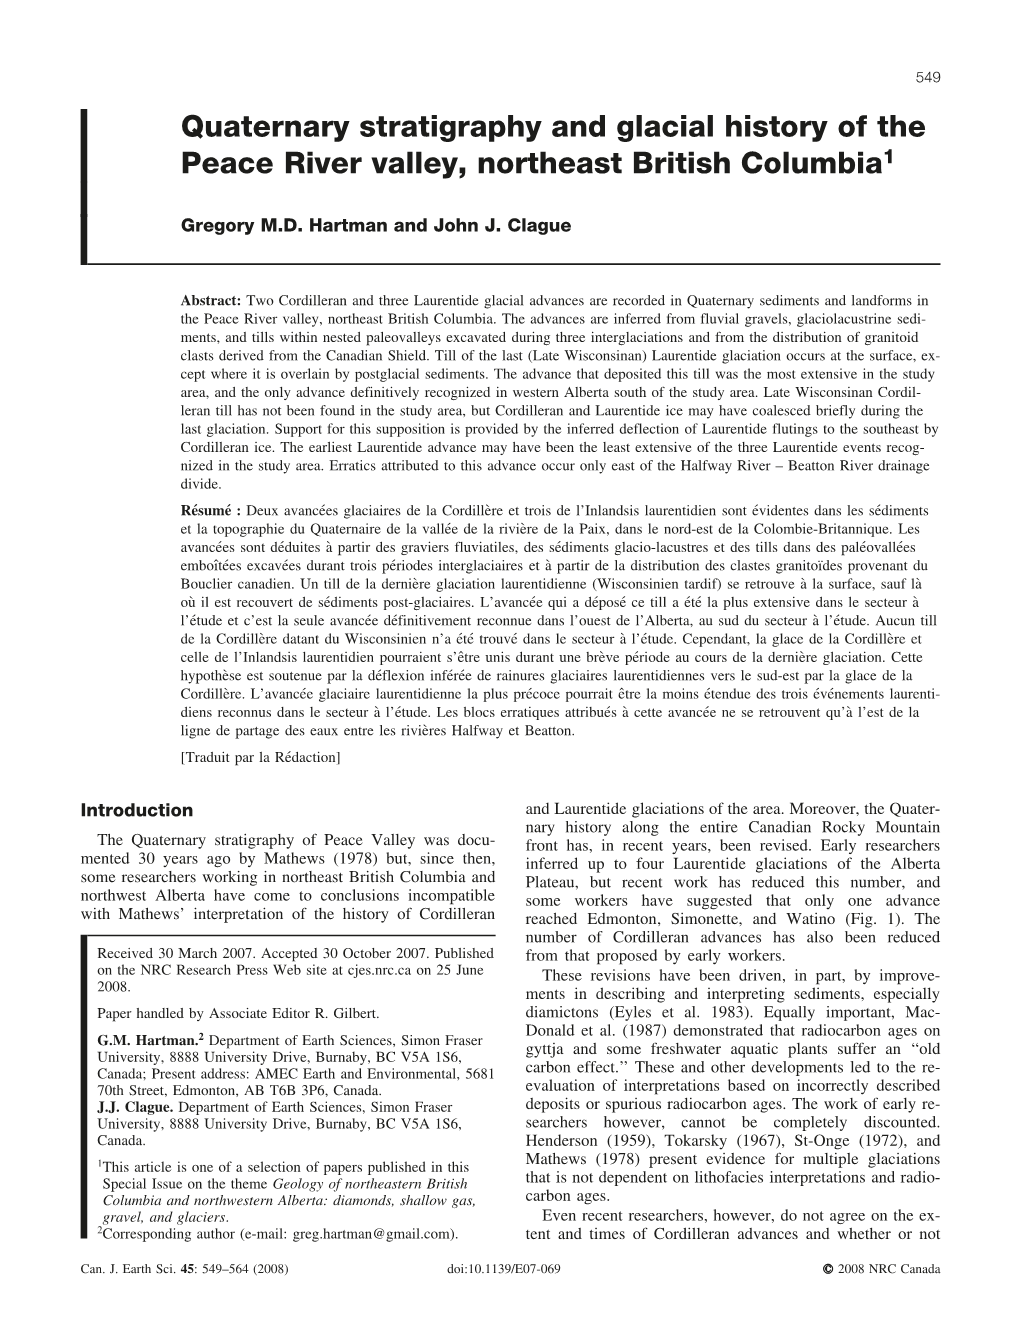 Quaternary Stratigraphy and Glacial History of the Peace River Valley, Northeast British Columbia1